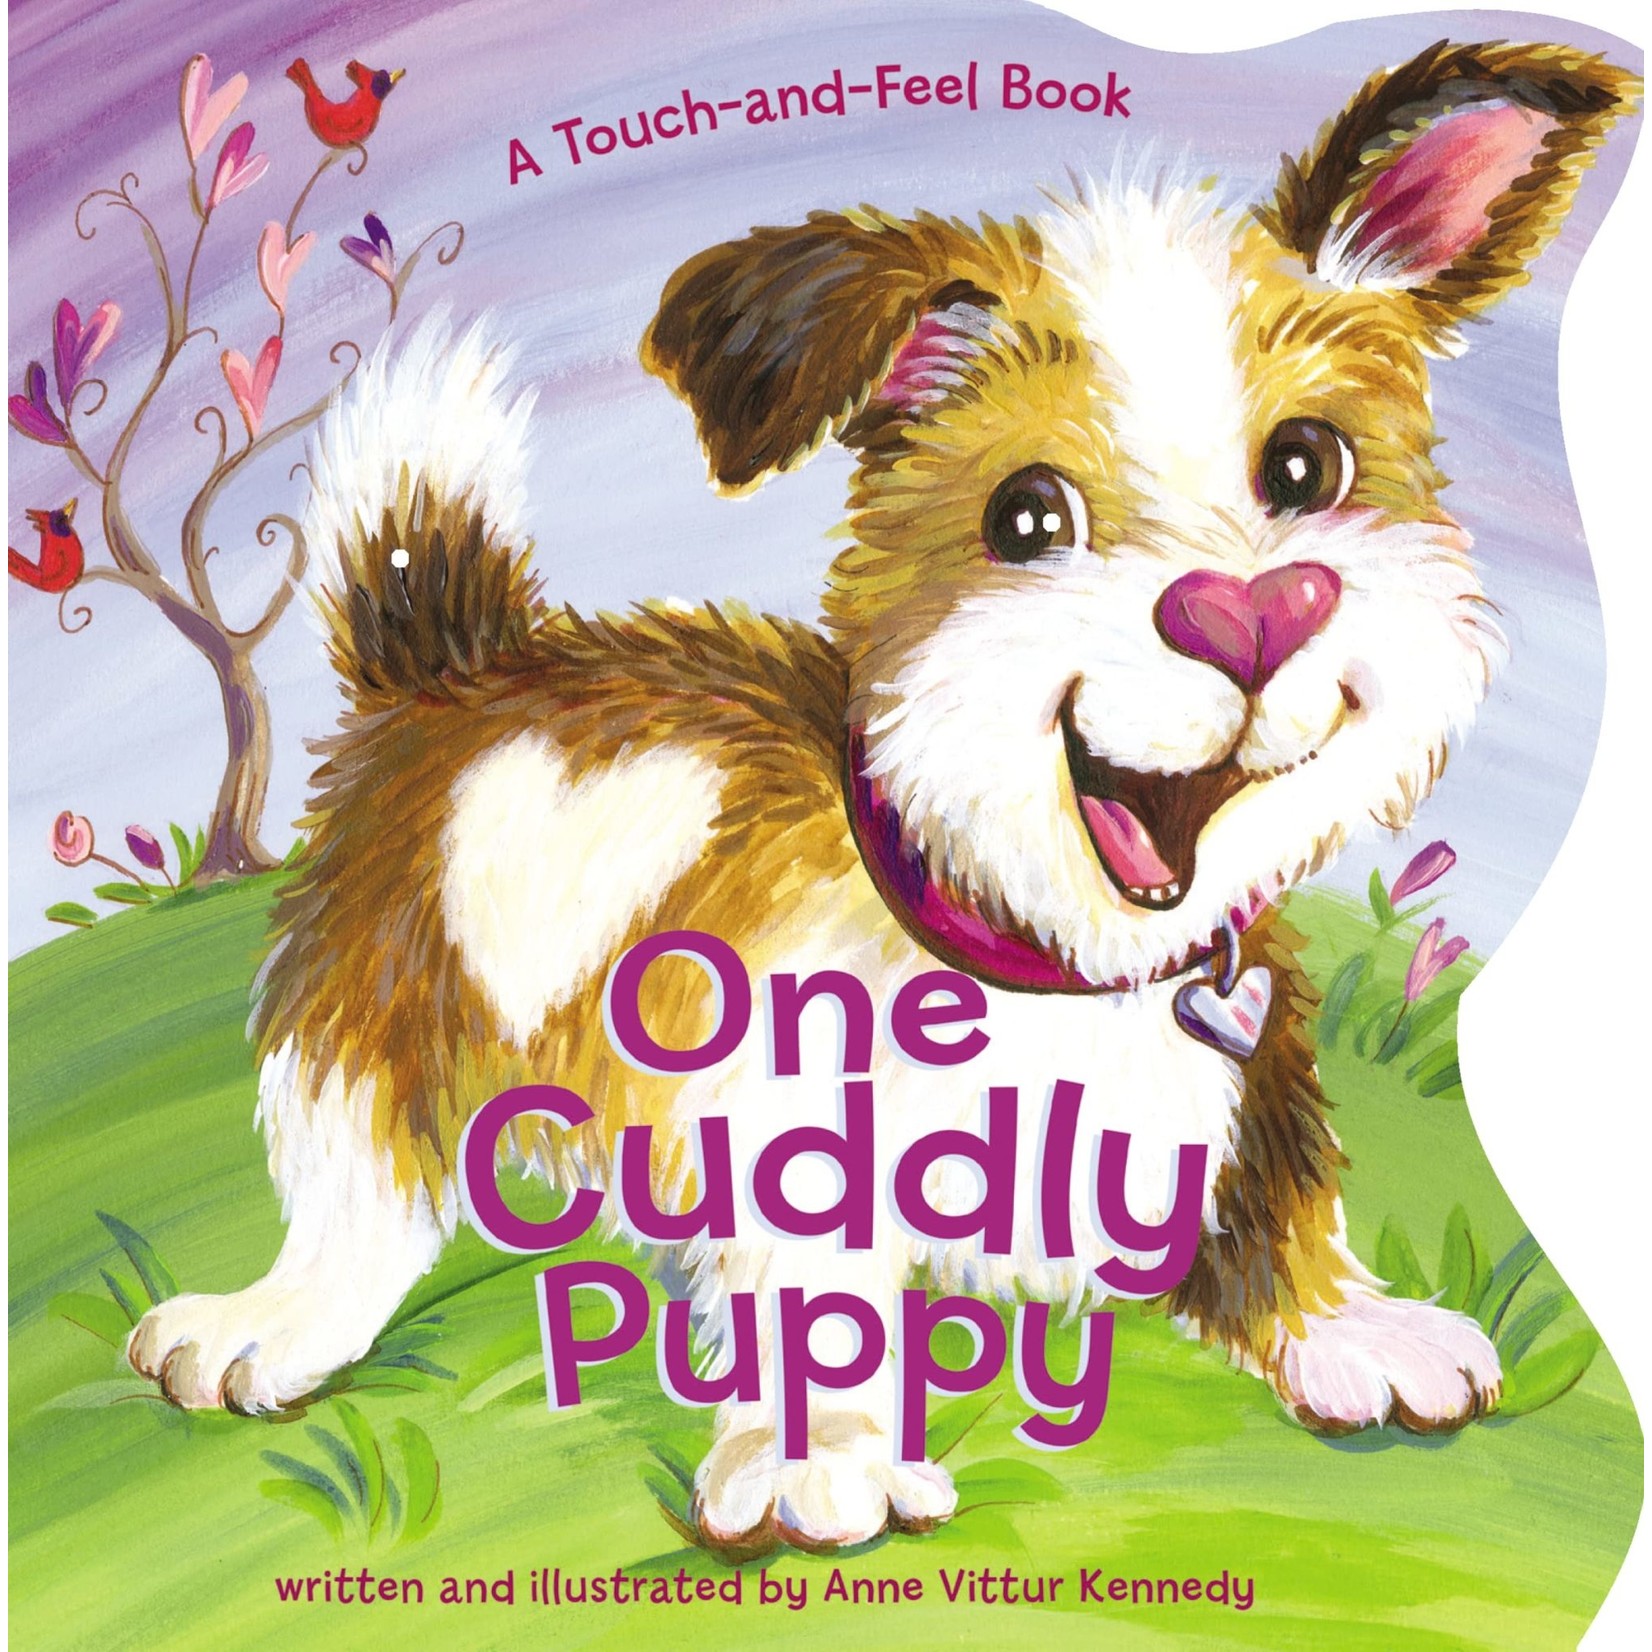 ONE CUDDLY PUPPY - A TOUCH & FEEL BOOK